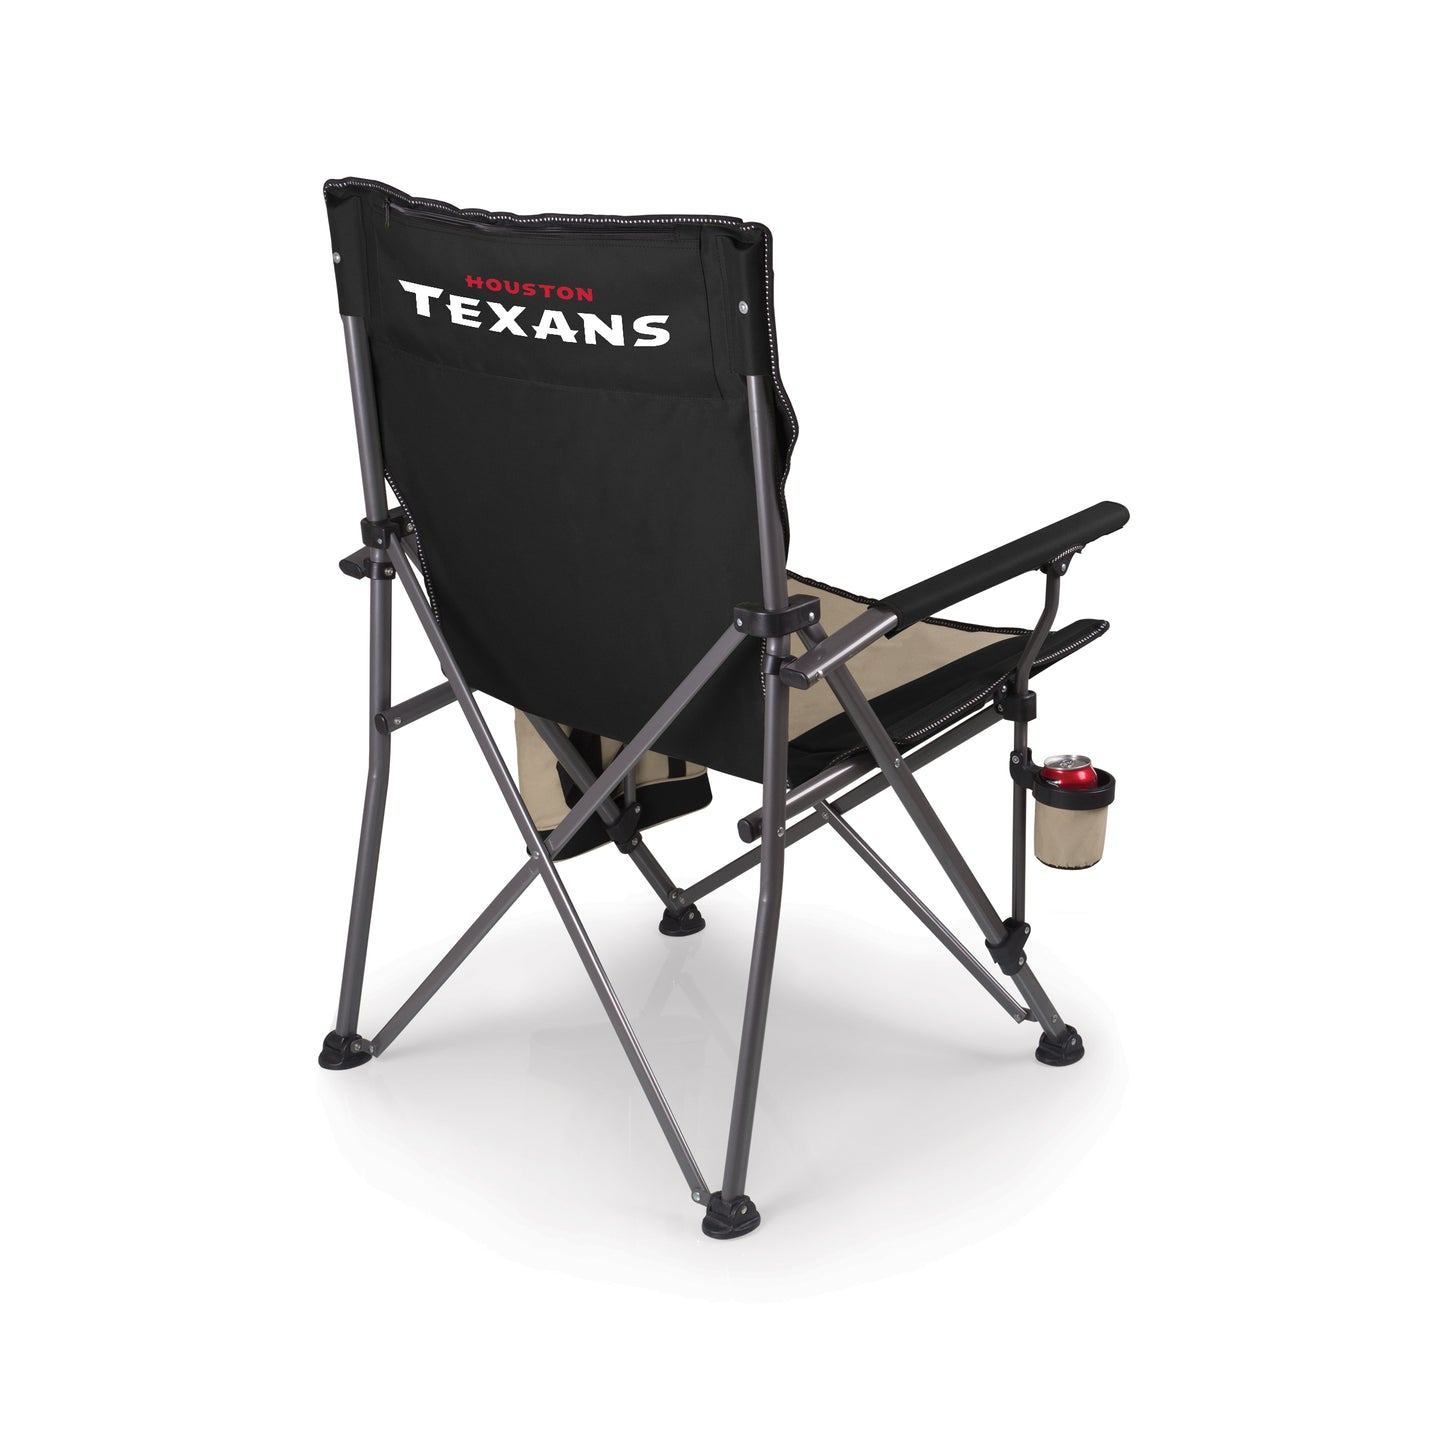 Houston Texans - Big Bear XL Camp Chair with Cooler